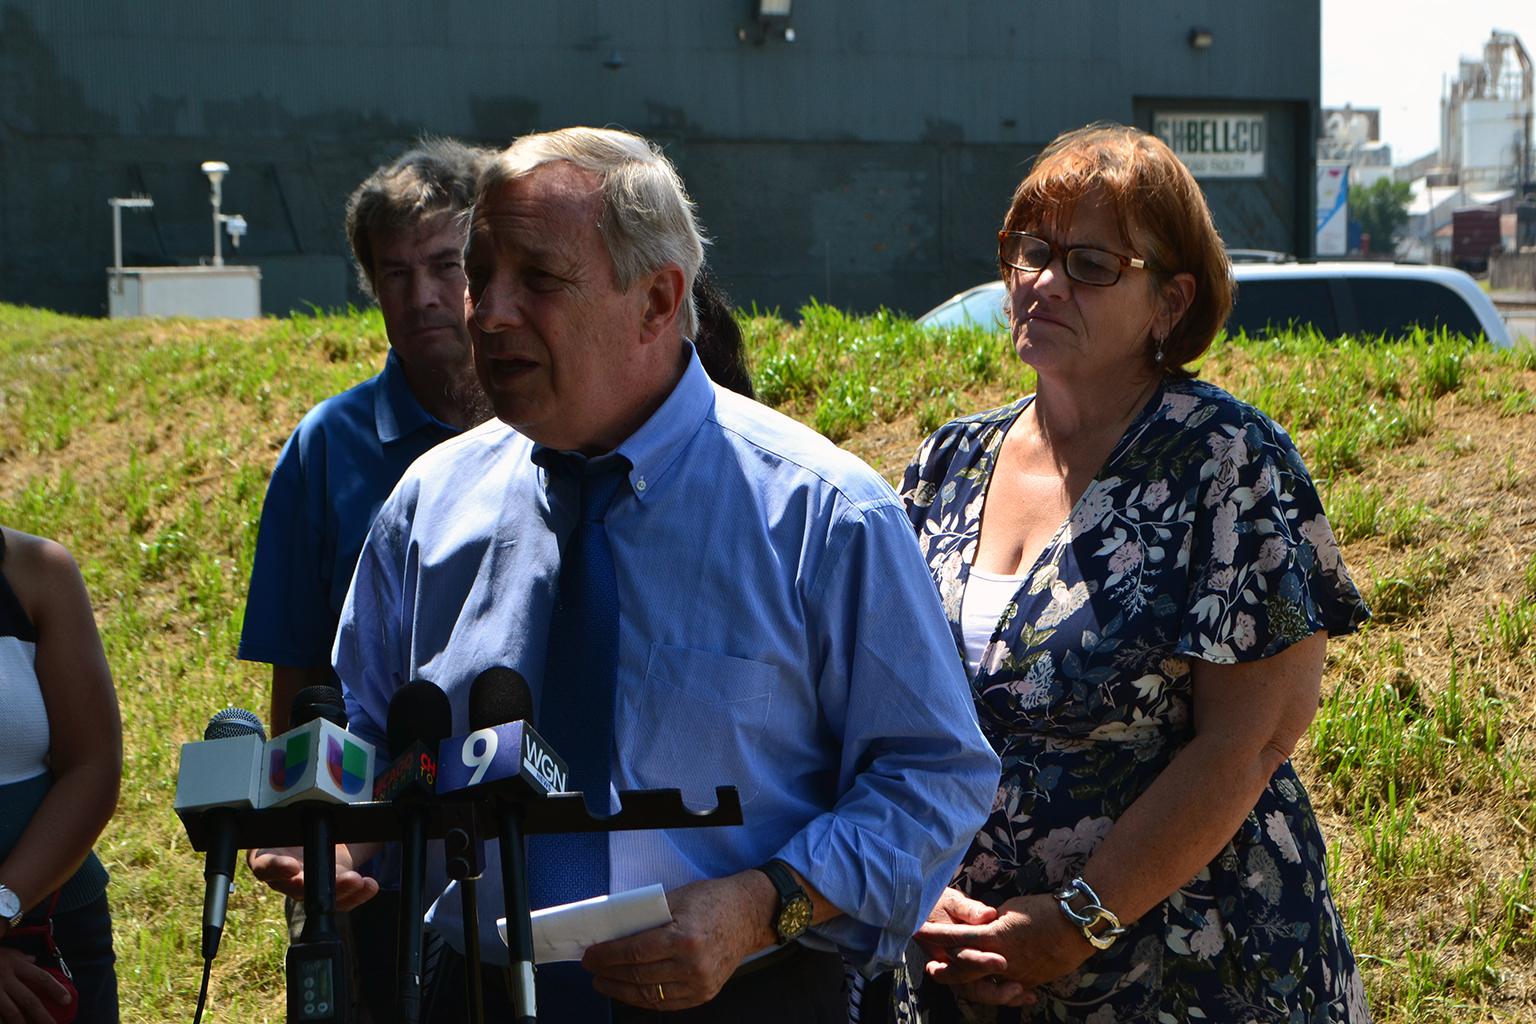 U.S. Sen. Dick Durbin speaks to the press after meeting with Southeast Side residents on Thursday, Aug. 9, 2018 to discuss public health threats stemming from nearby industrial facilities. (Alex Ruppenthal / Chicago Tonight)